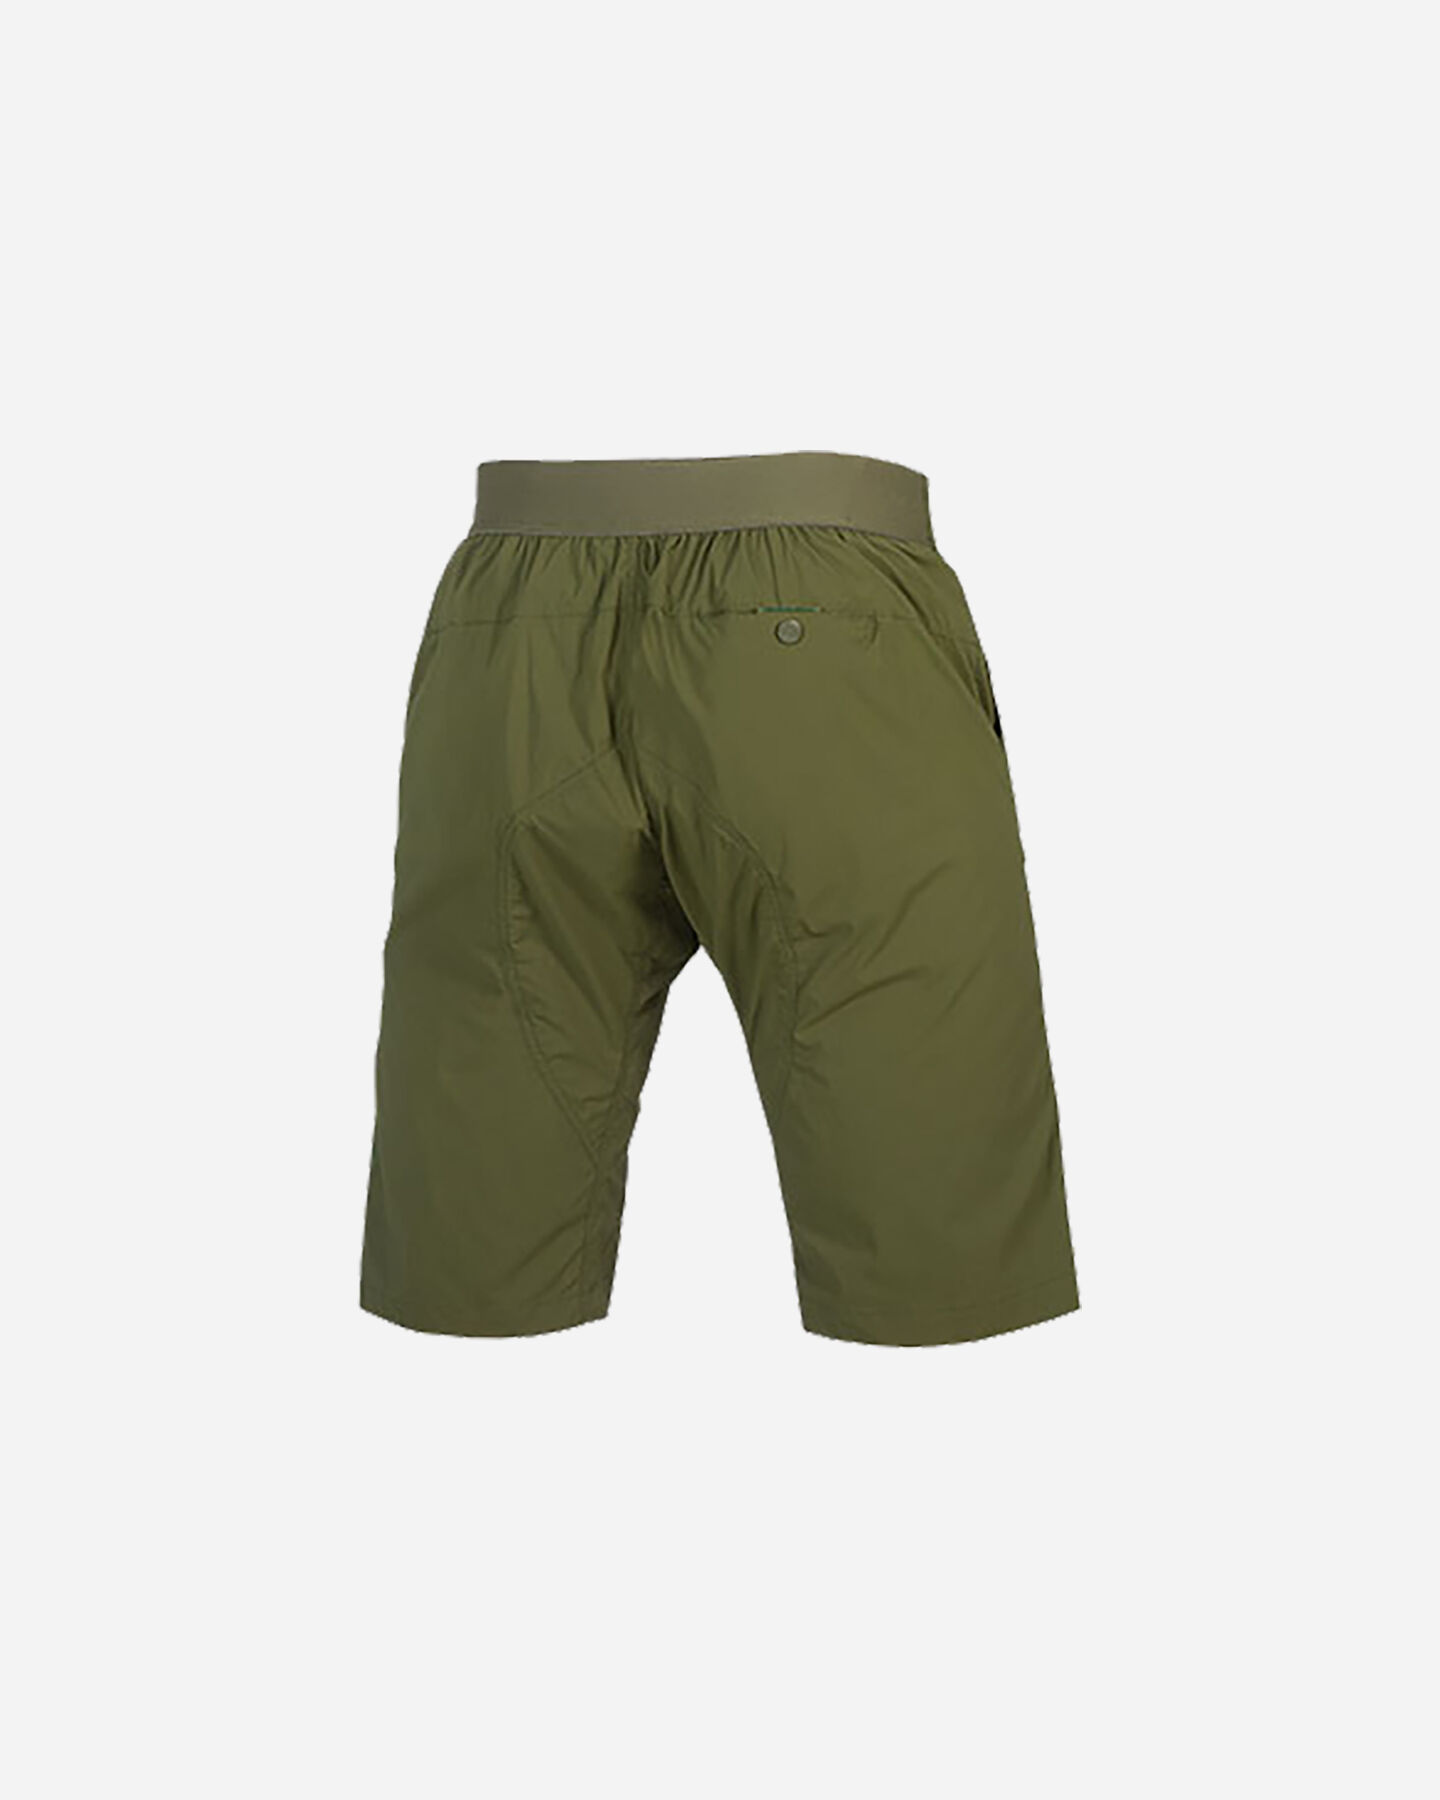  Short ciclismo ENDURA HUMMVEE LITE WITH LINER M S4123645|1|M scatto 1